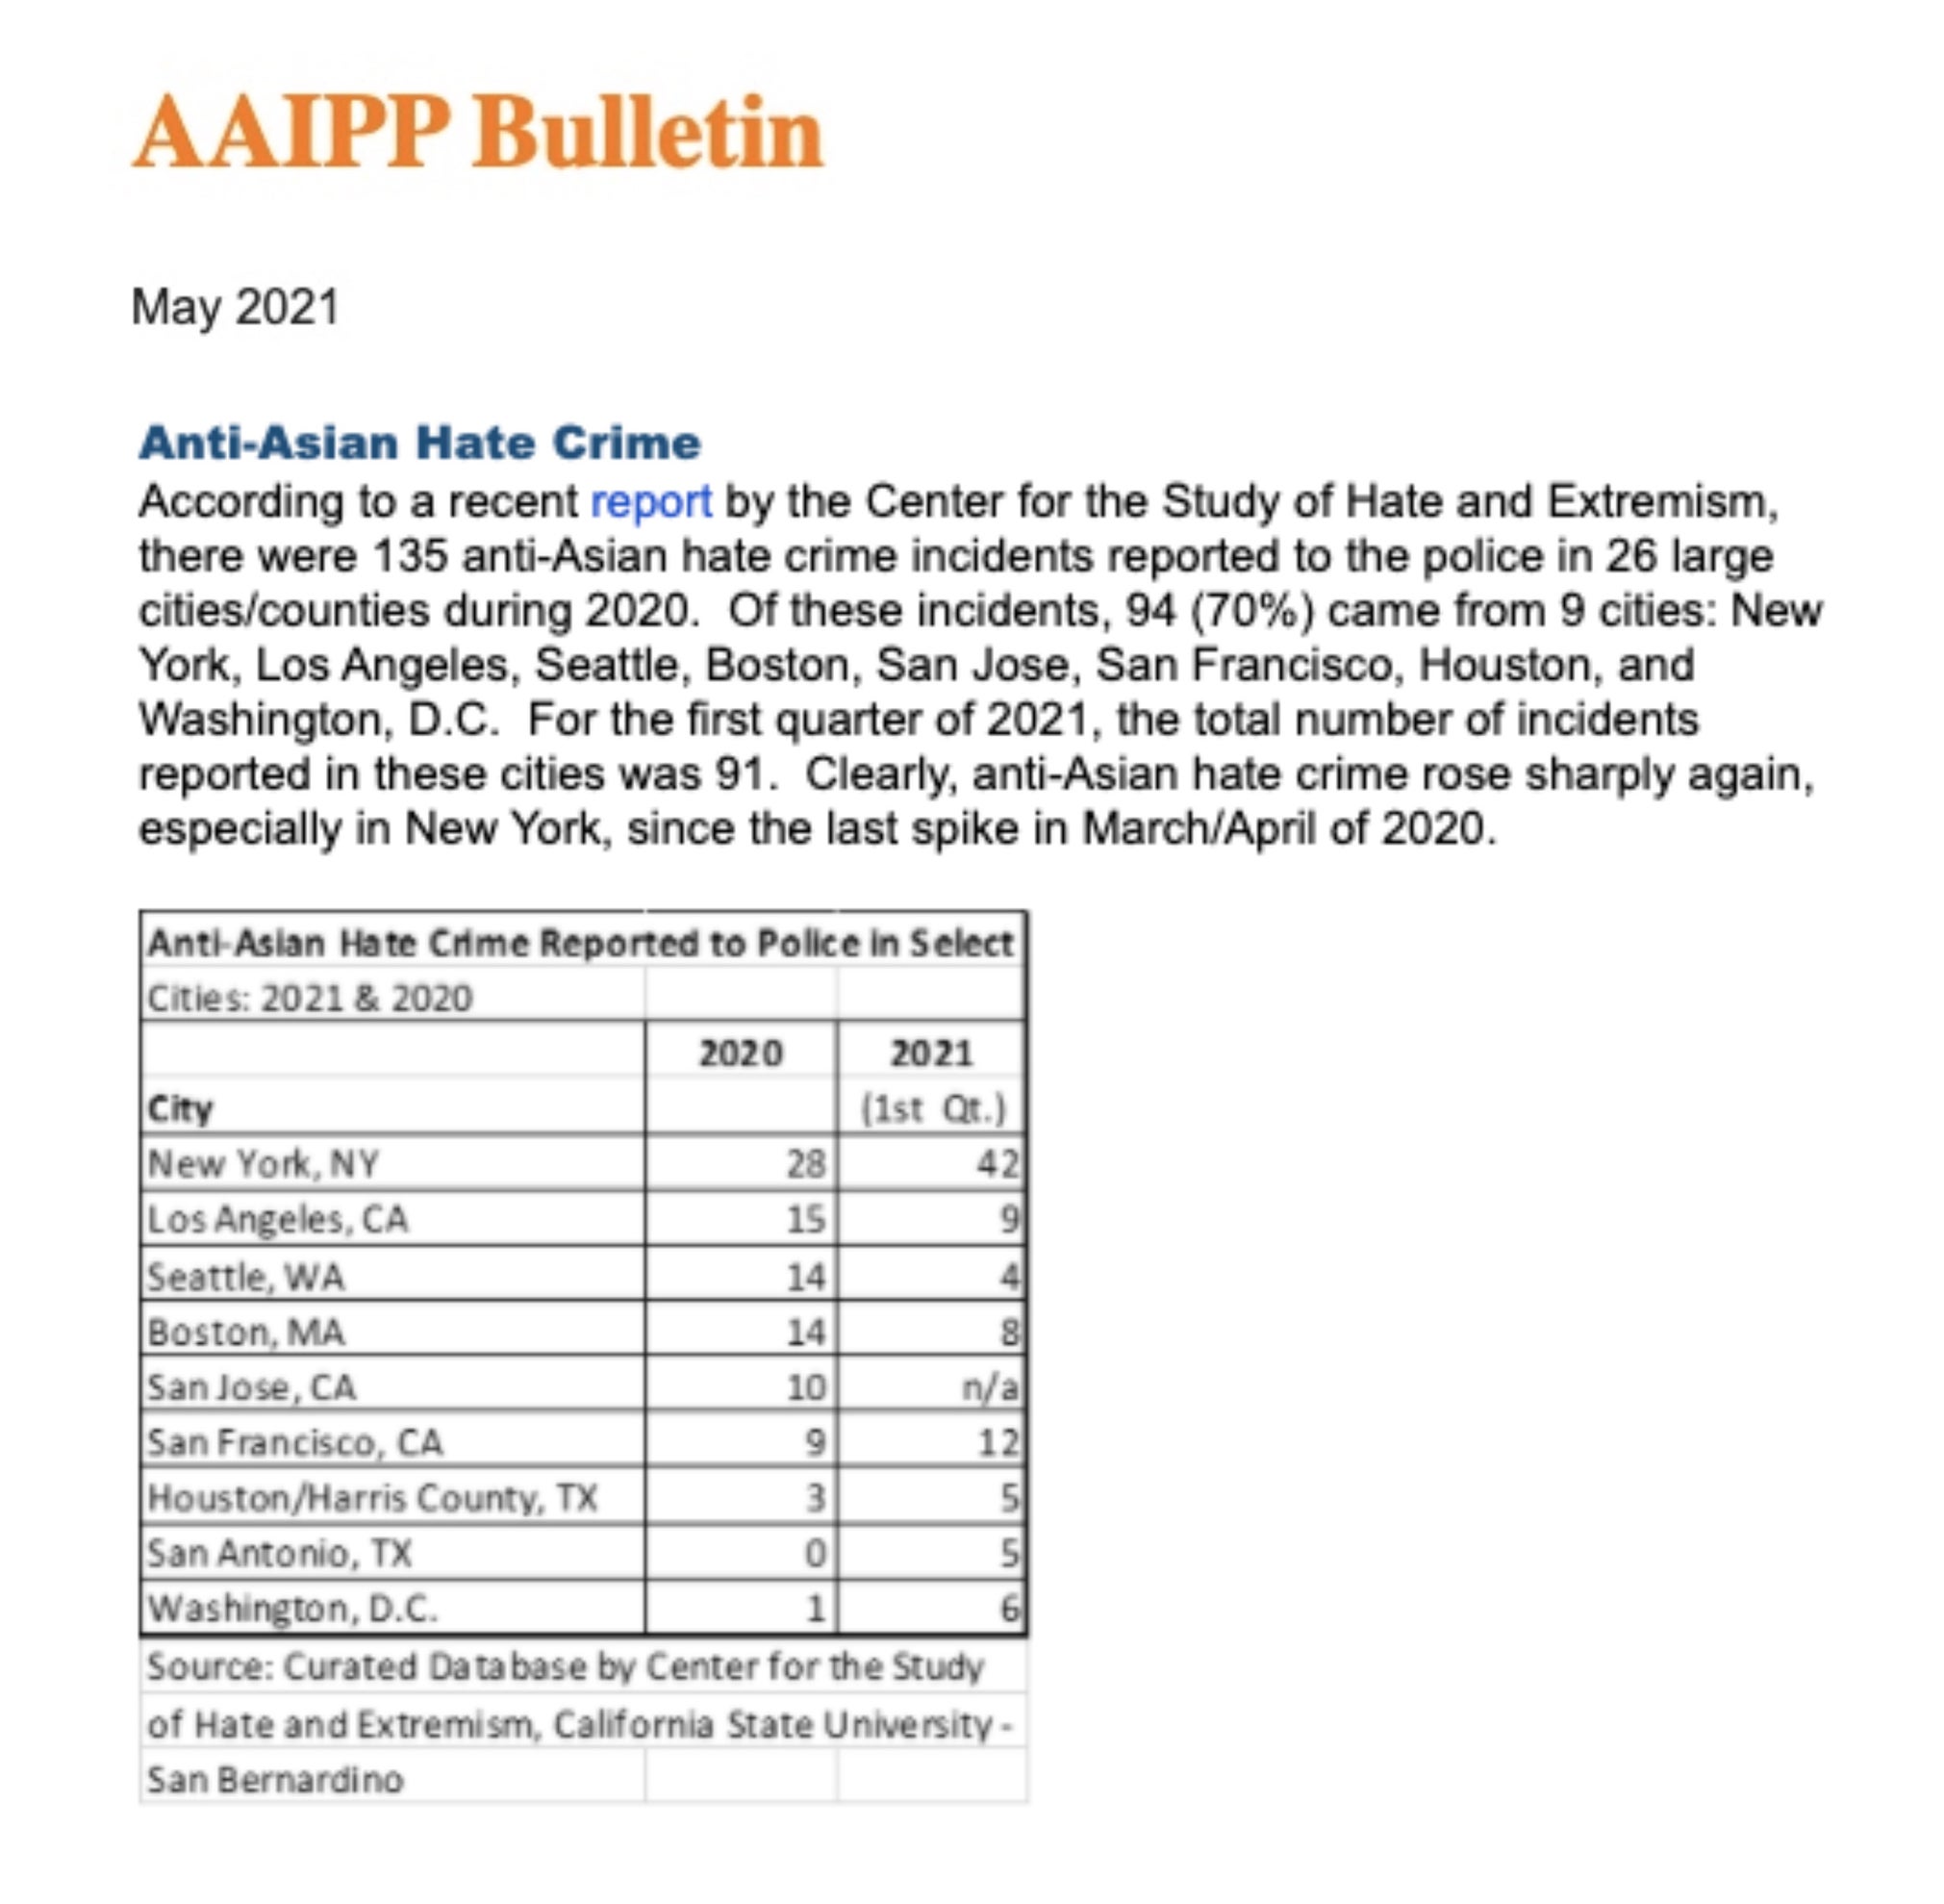 A screenshot of the beginning of the AAIPP Bulletin report on Anti-Asian Hate Crime